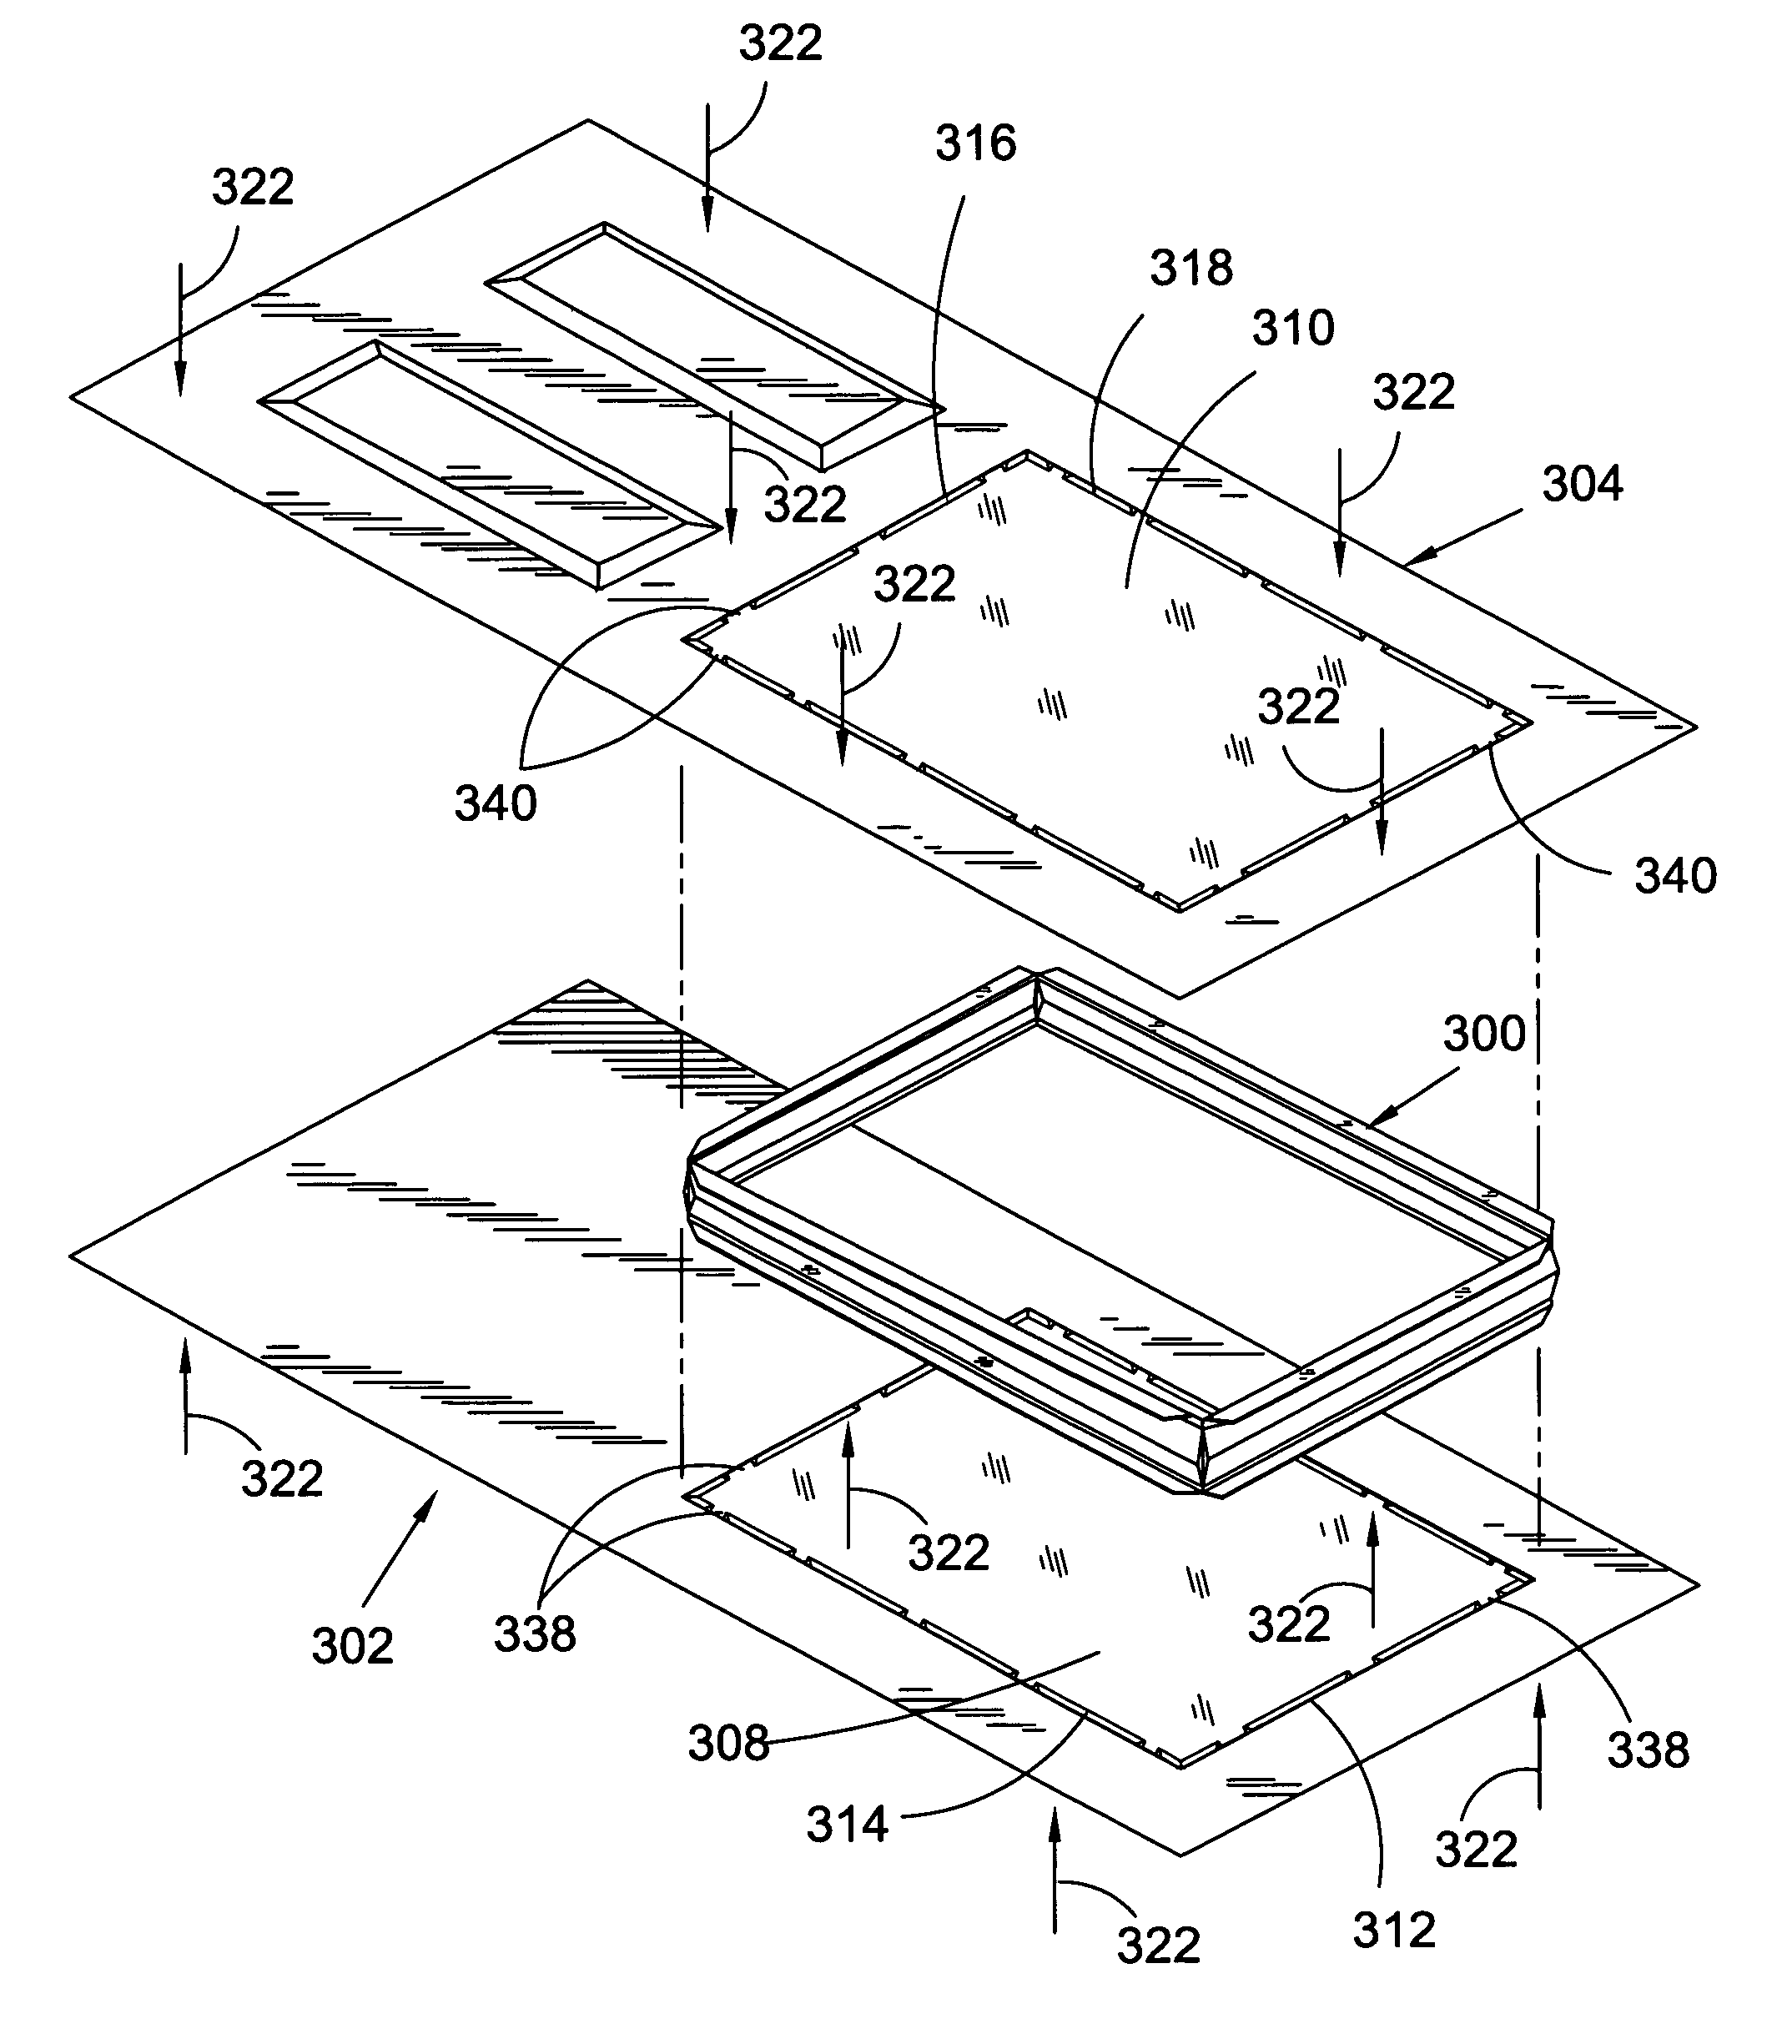 Apparatus and method of fabricating a door